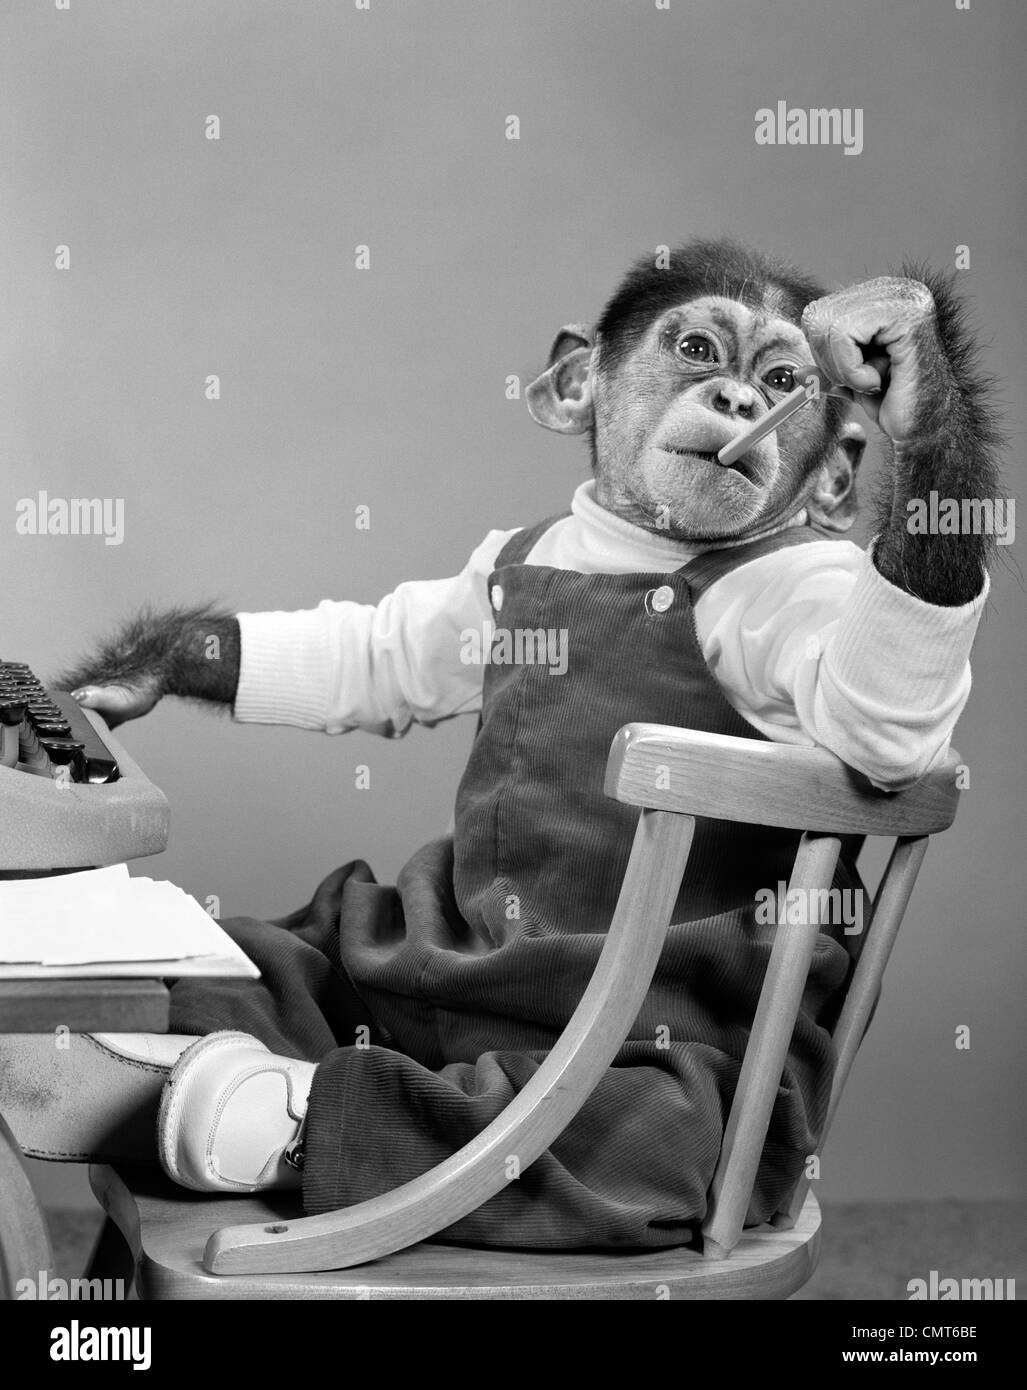 1950s CHIMPANZEE IN OVERALLS SITTING IN CHAIR AT TYPEWRITER PUTTING PENCIL  ERASER IN MOUTH Stock Photo - Alamy